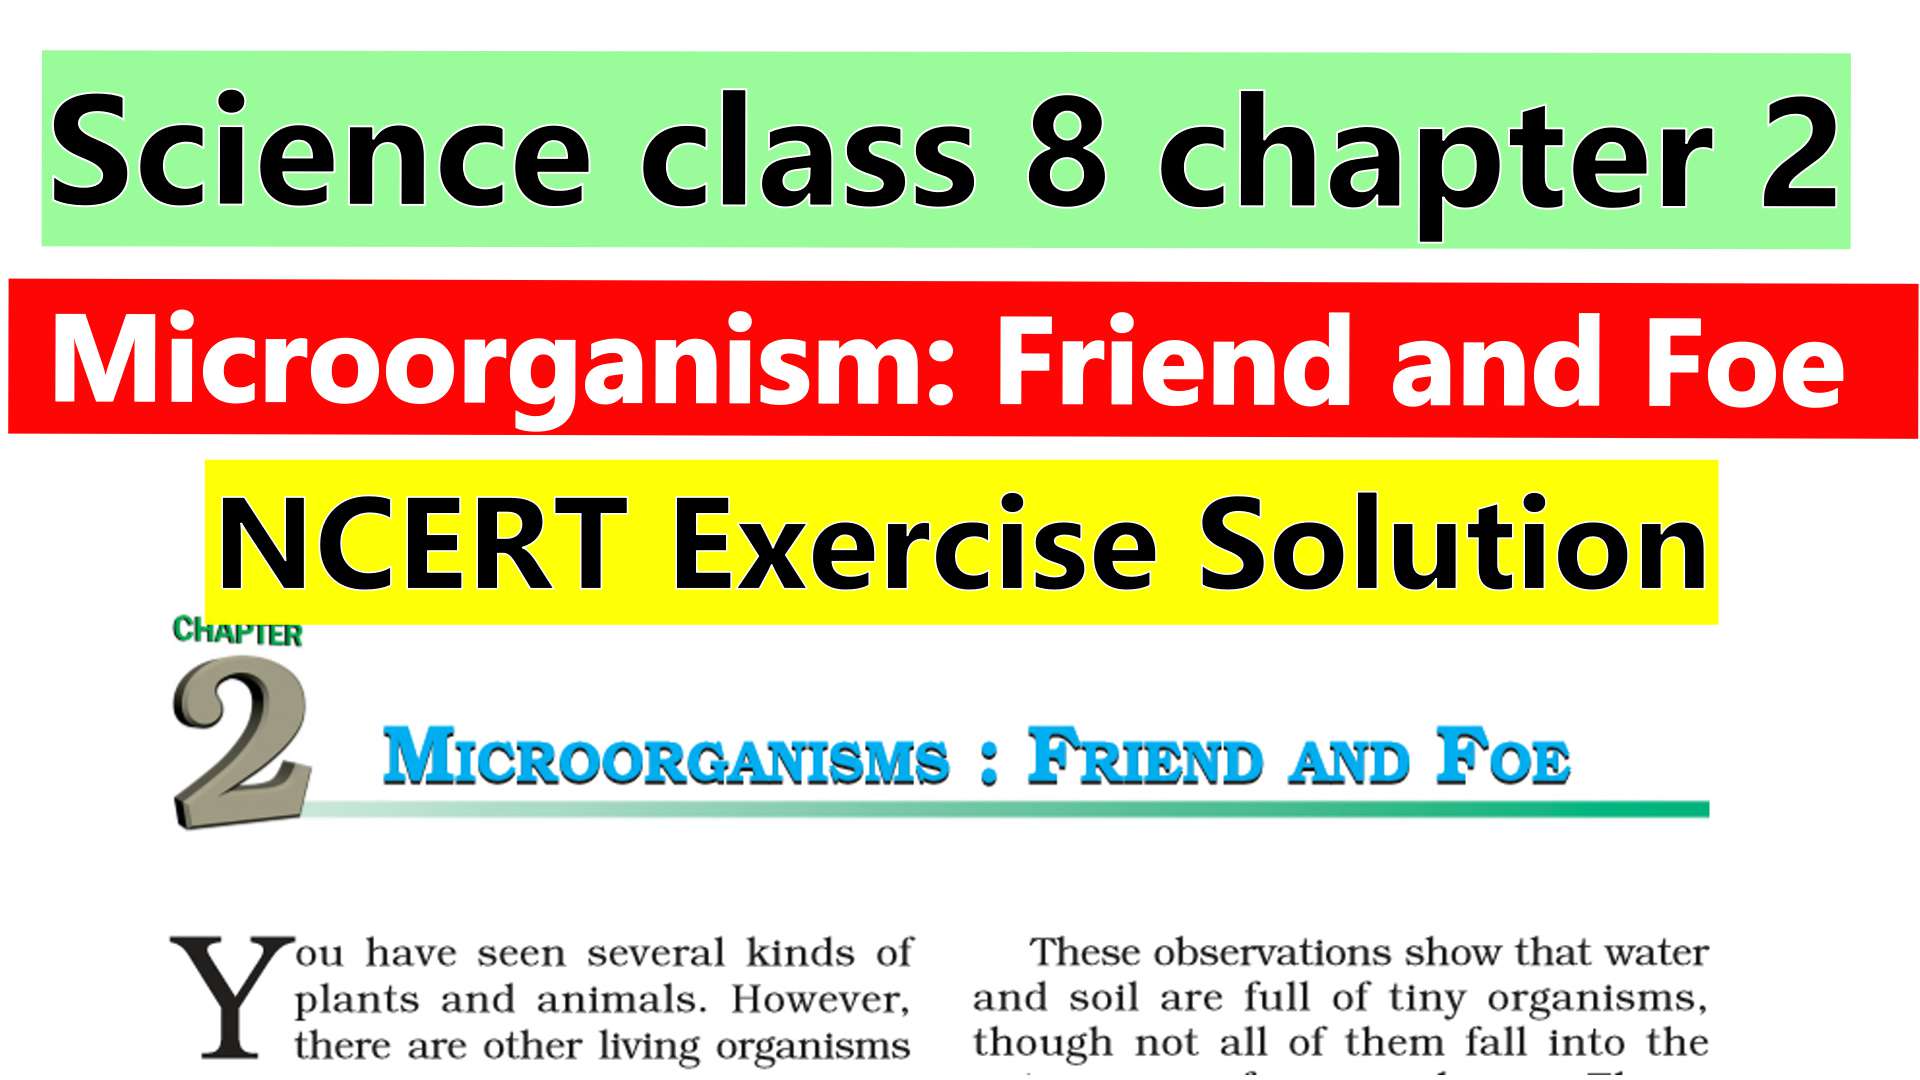 Science class 8 chapter 2- Microorganism Friend and Foe - NCERT Exercise Solution